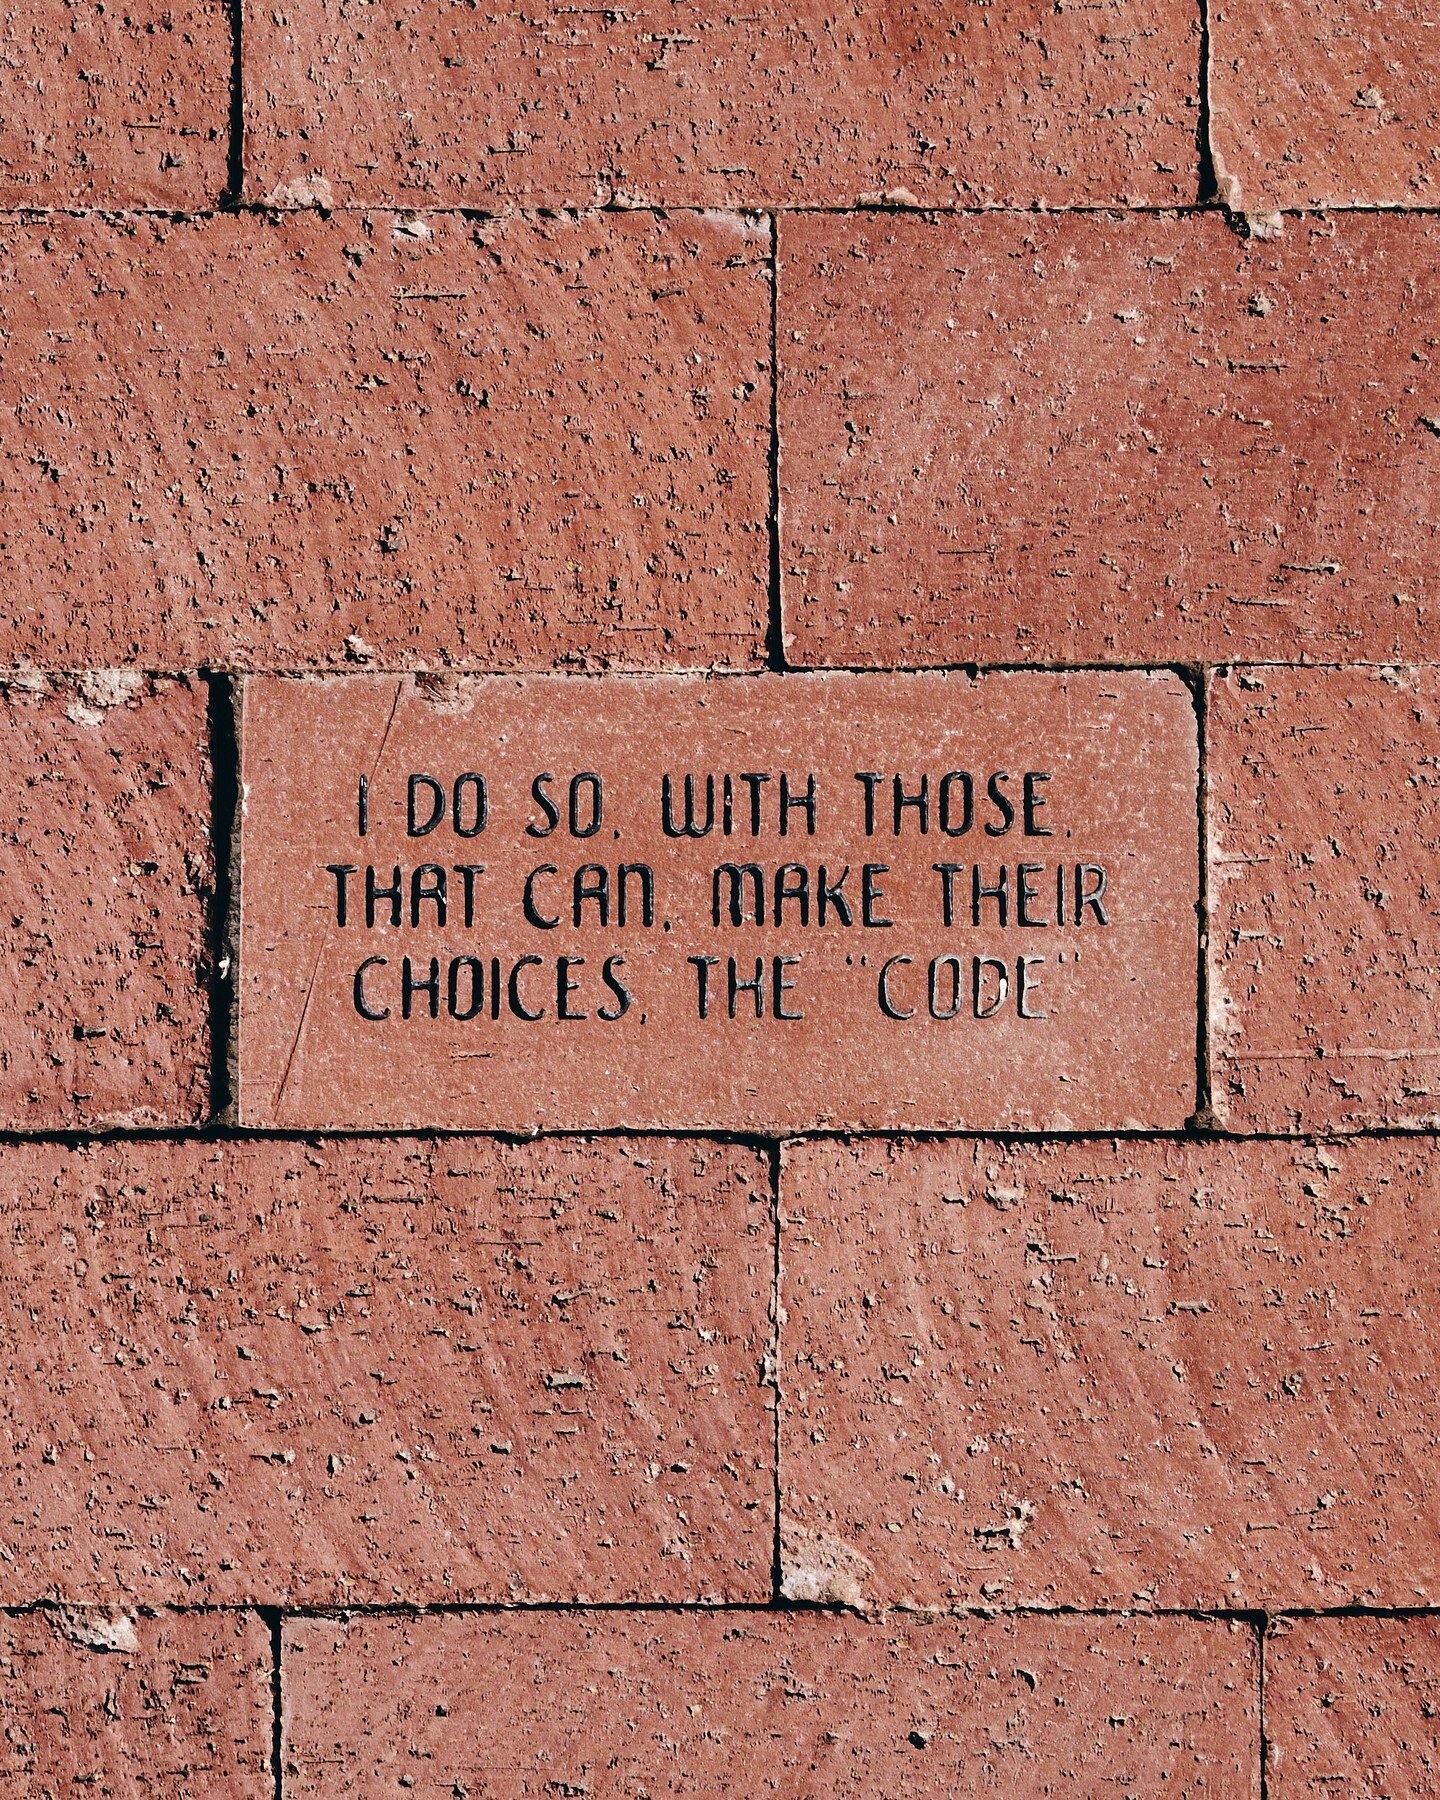 This old cadet brick on the @newmexicomilitaryinstitute campus is almost like a short poem, with it's short sentences and disparate concept. As a recruit at training (RAT) we were not allowed to even walk freely on these bricks. The &quot;code&quot; 